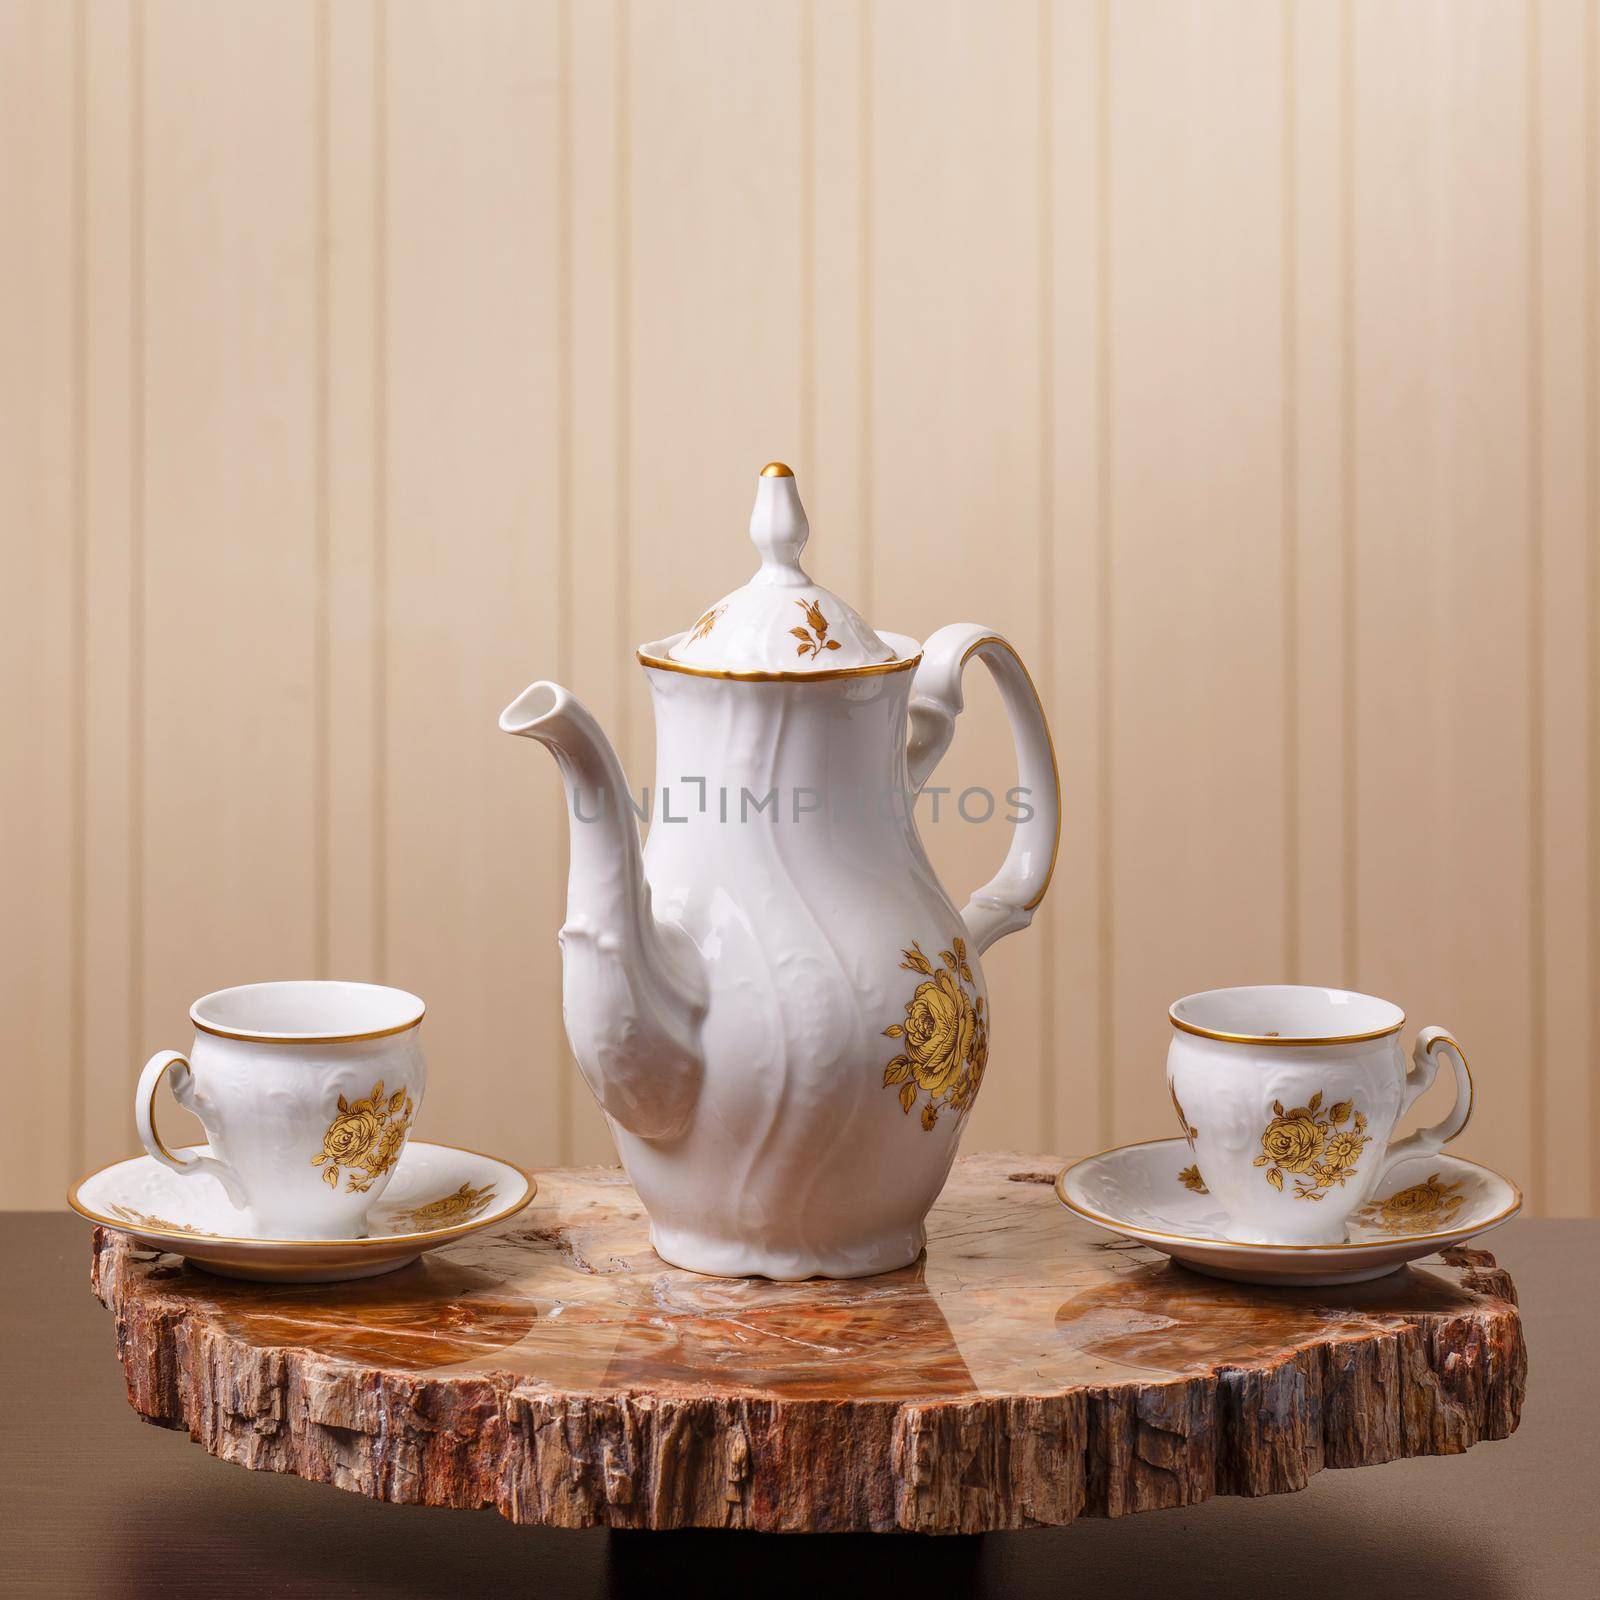 Elegant coffee set on an exclusive tray made from a cut of ancient petrified wood